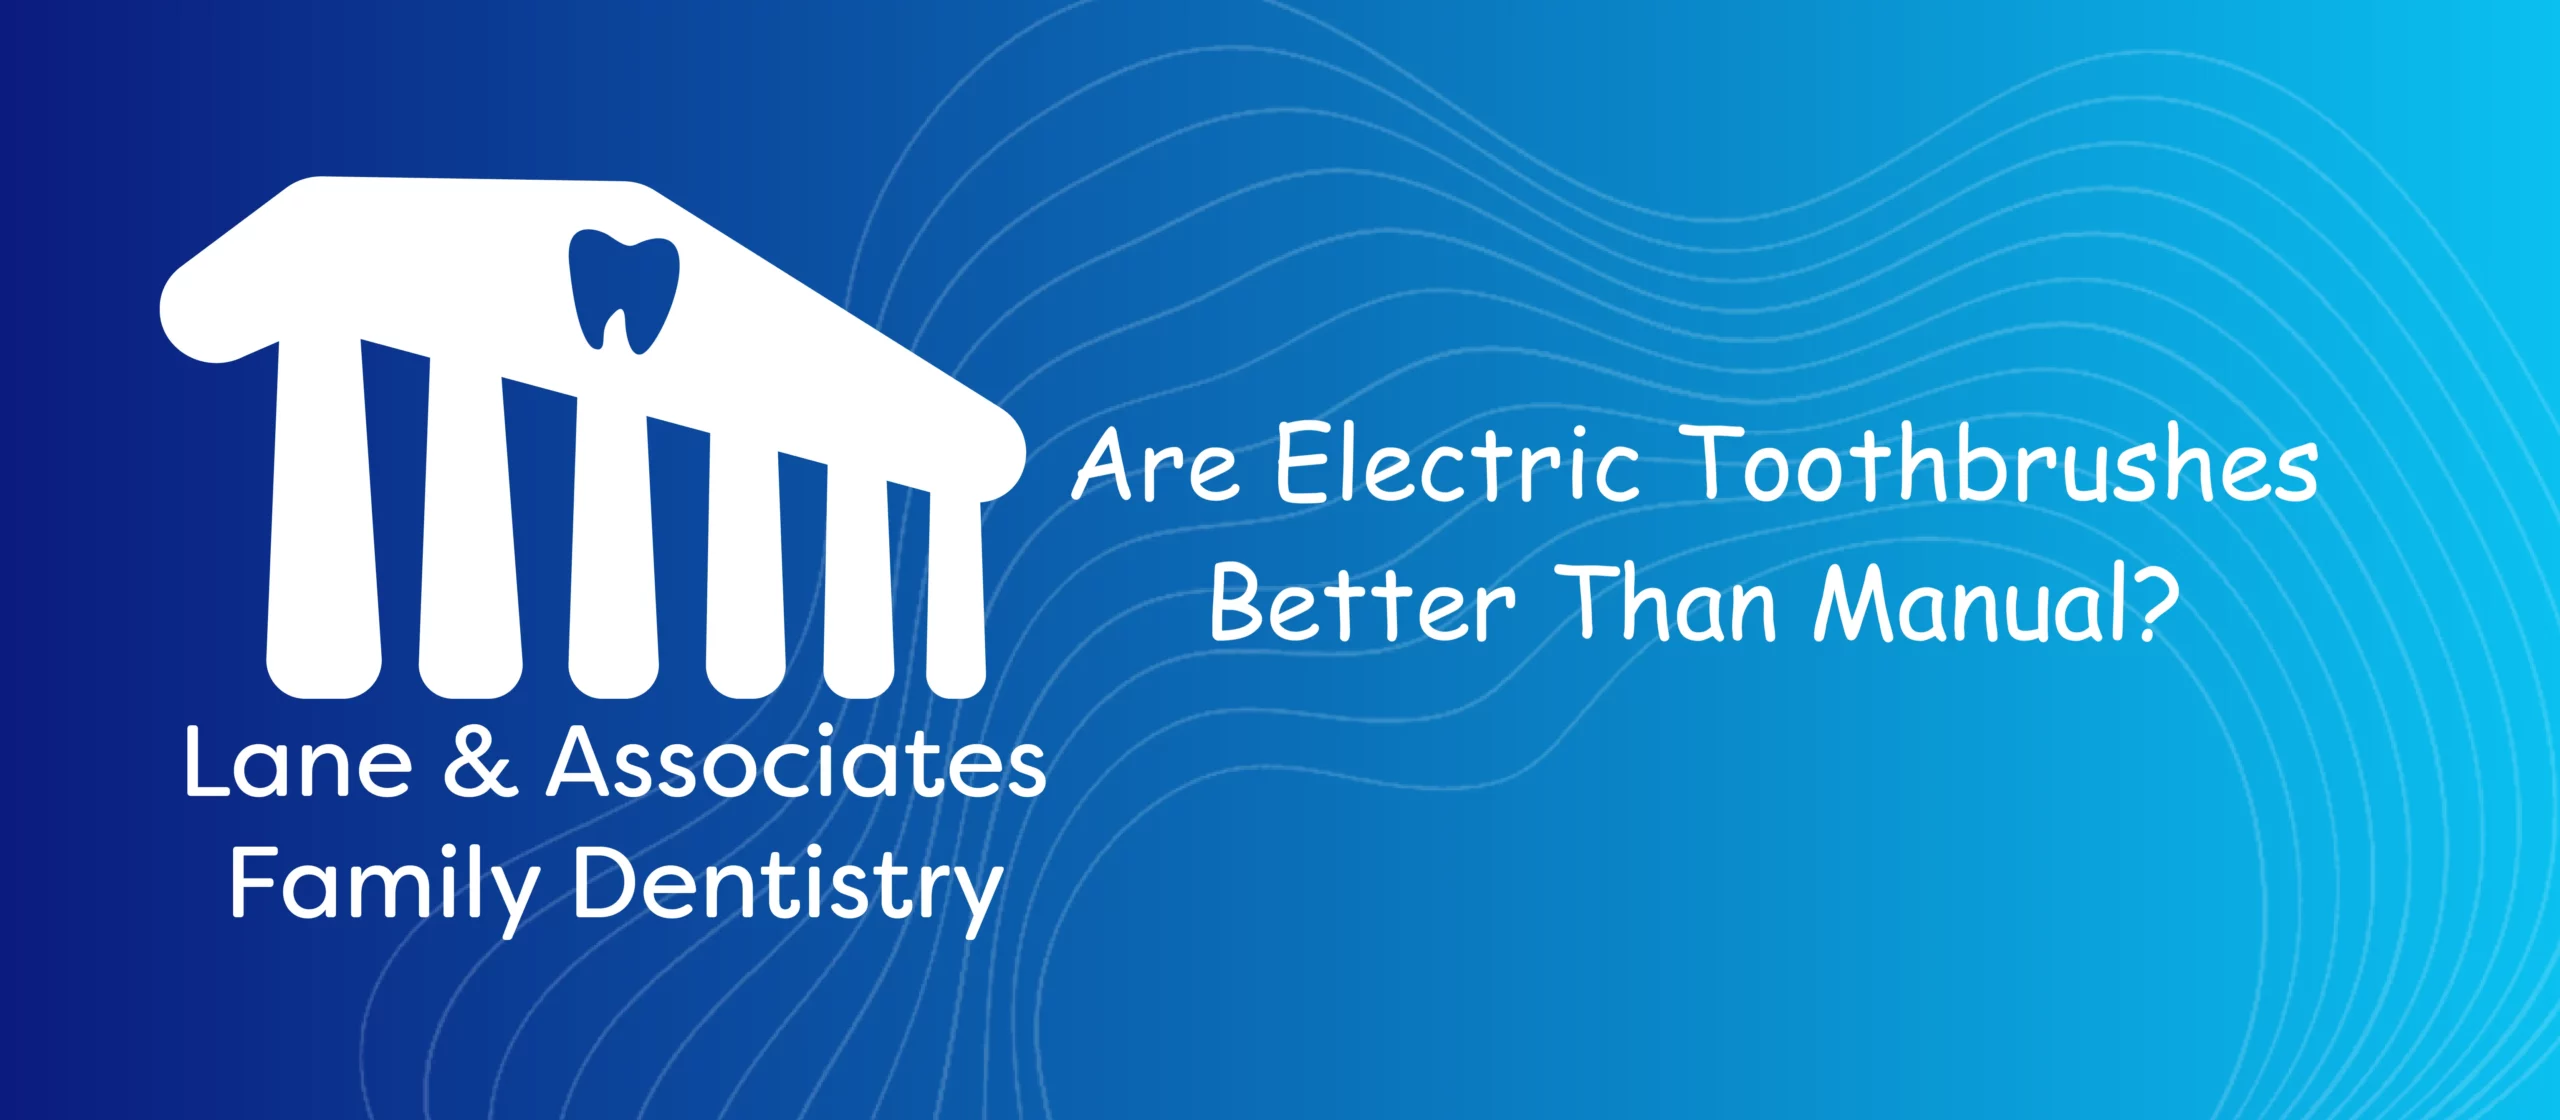 Are Electric Toothbrushes Better than Manual?